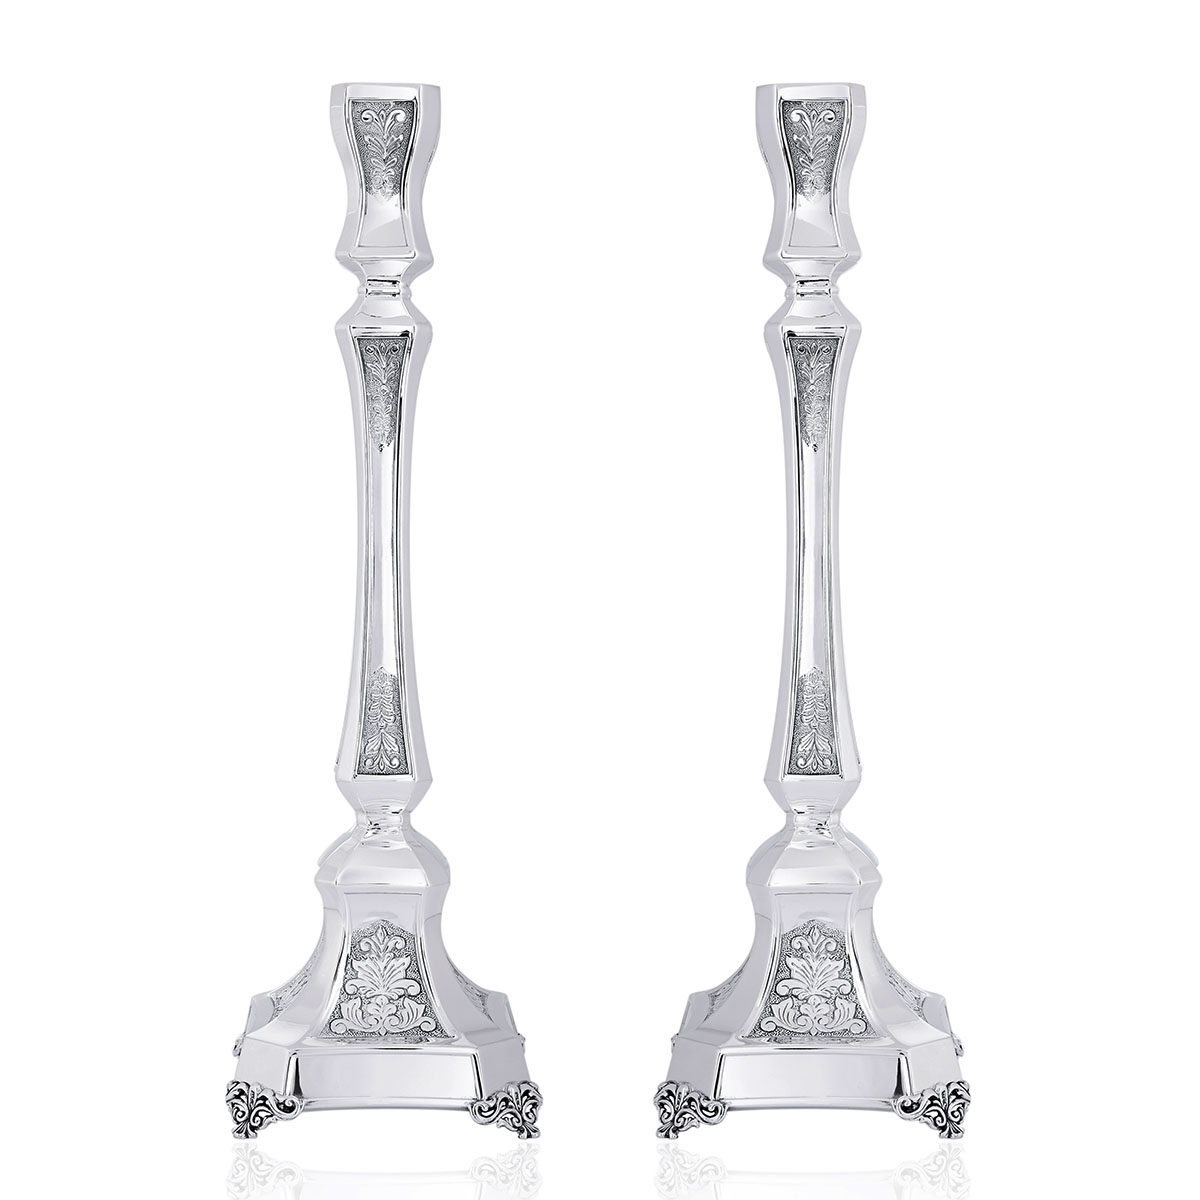 Grand 925 Sterling Silver Candlesticks With Ornate Design - 1